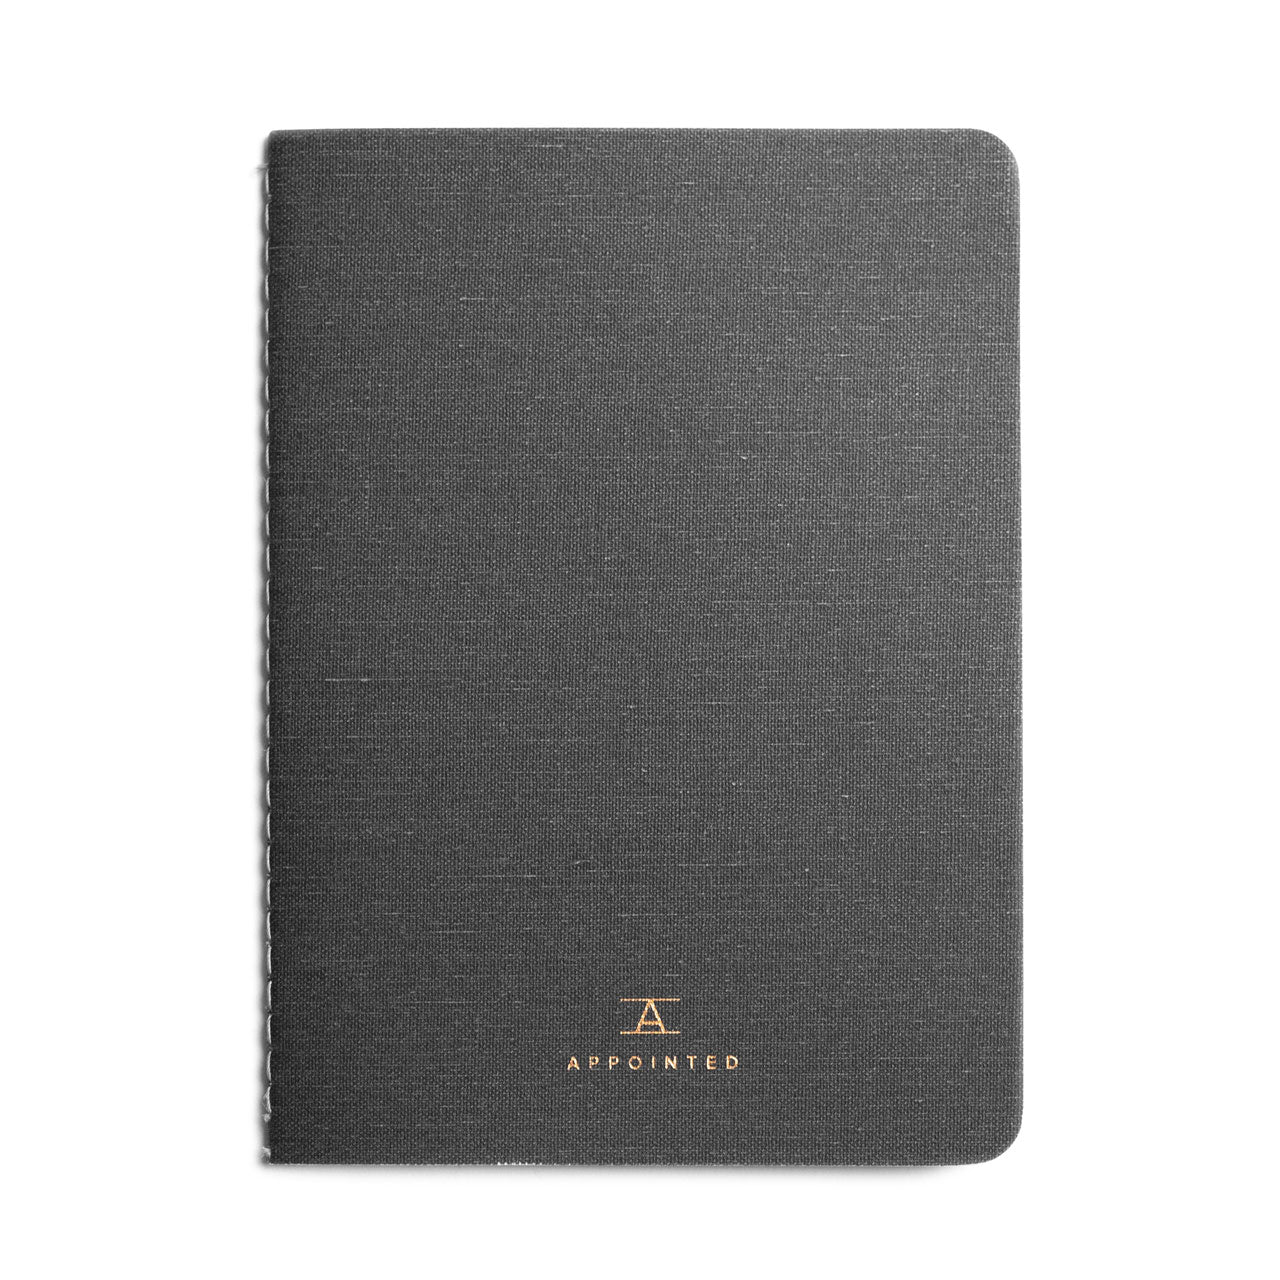 Appointed Jotter Notebook